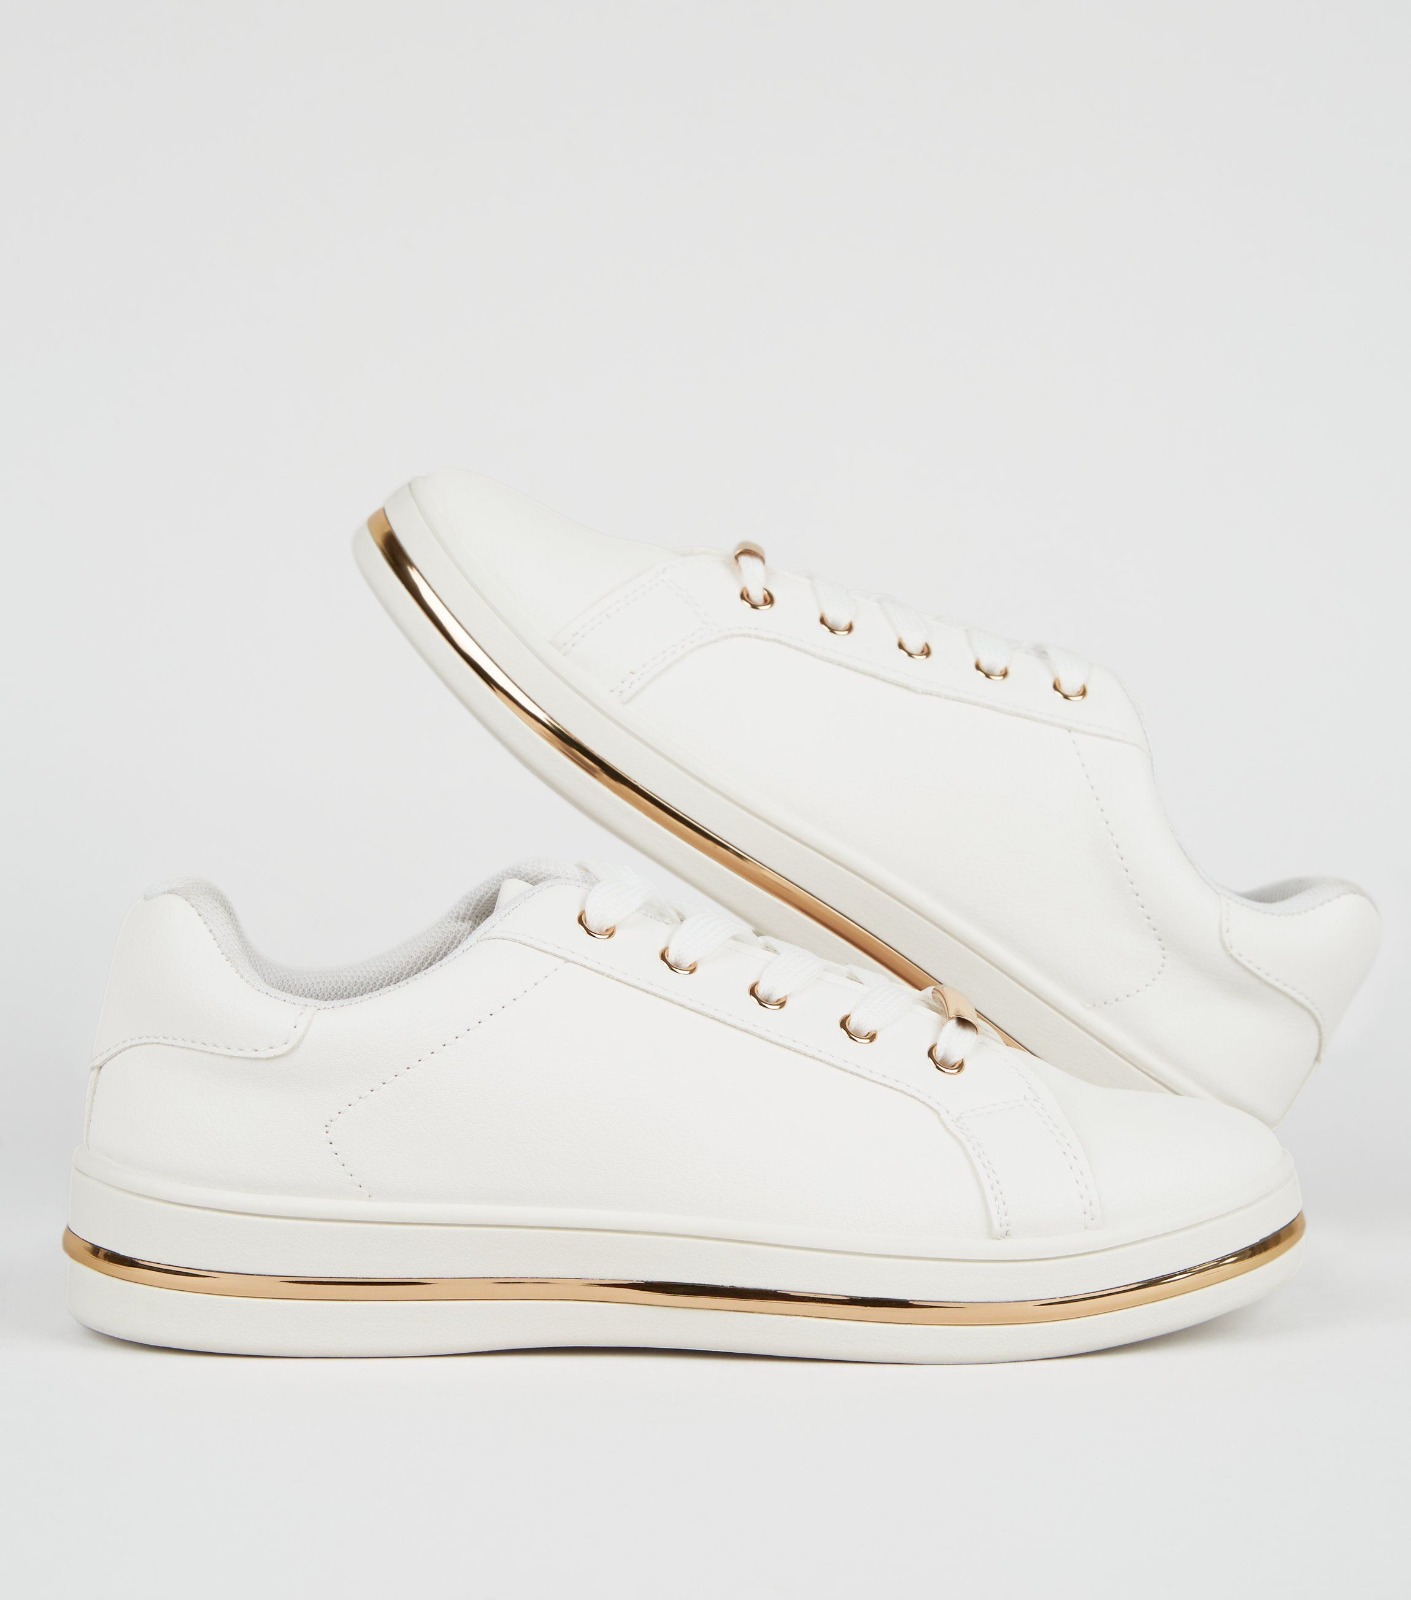 ladies white leather trainers